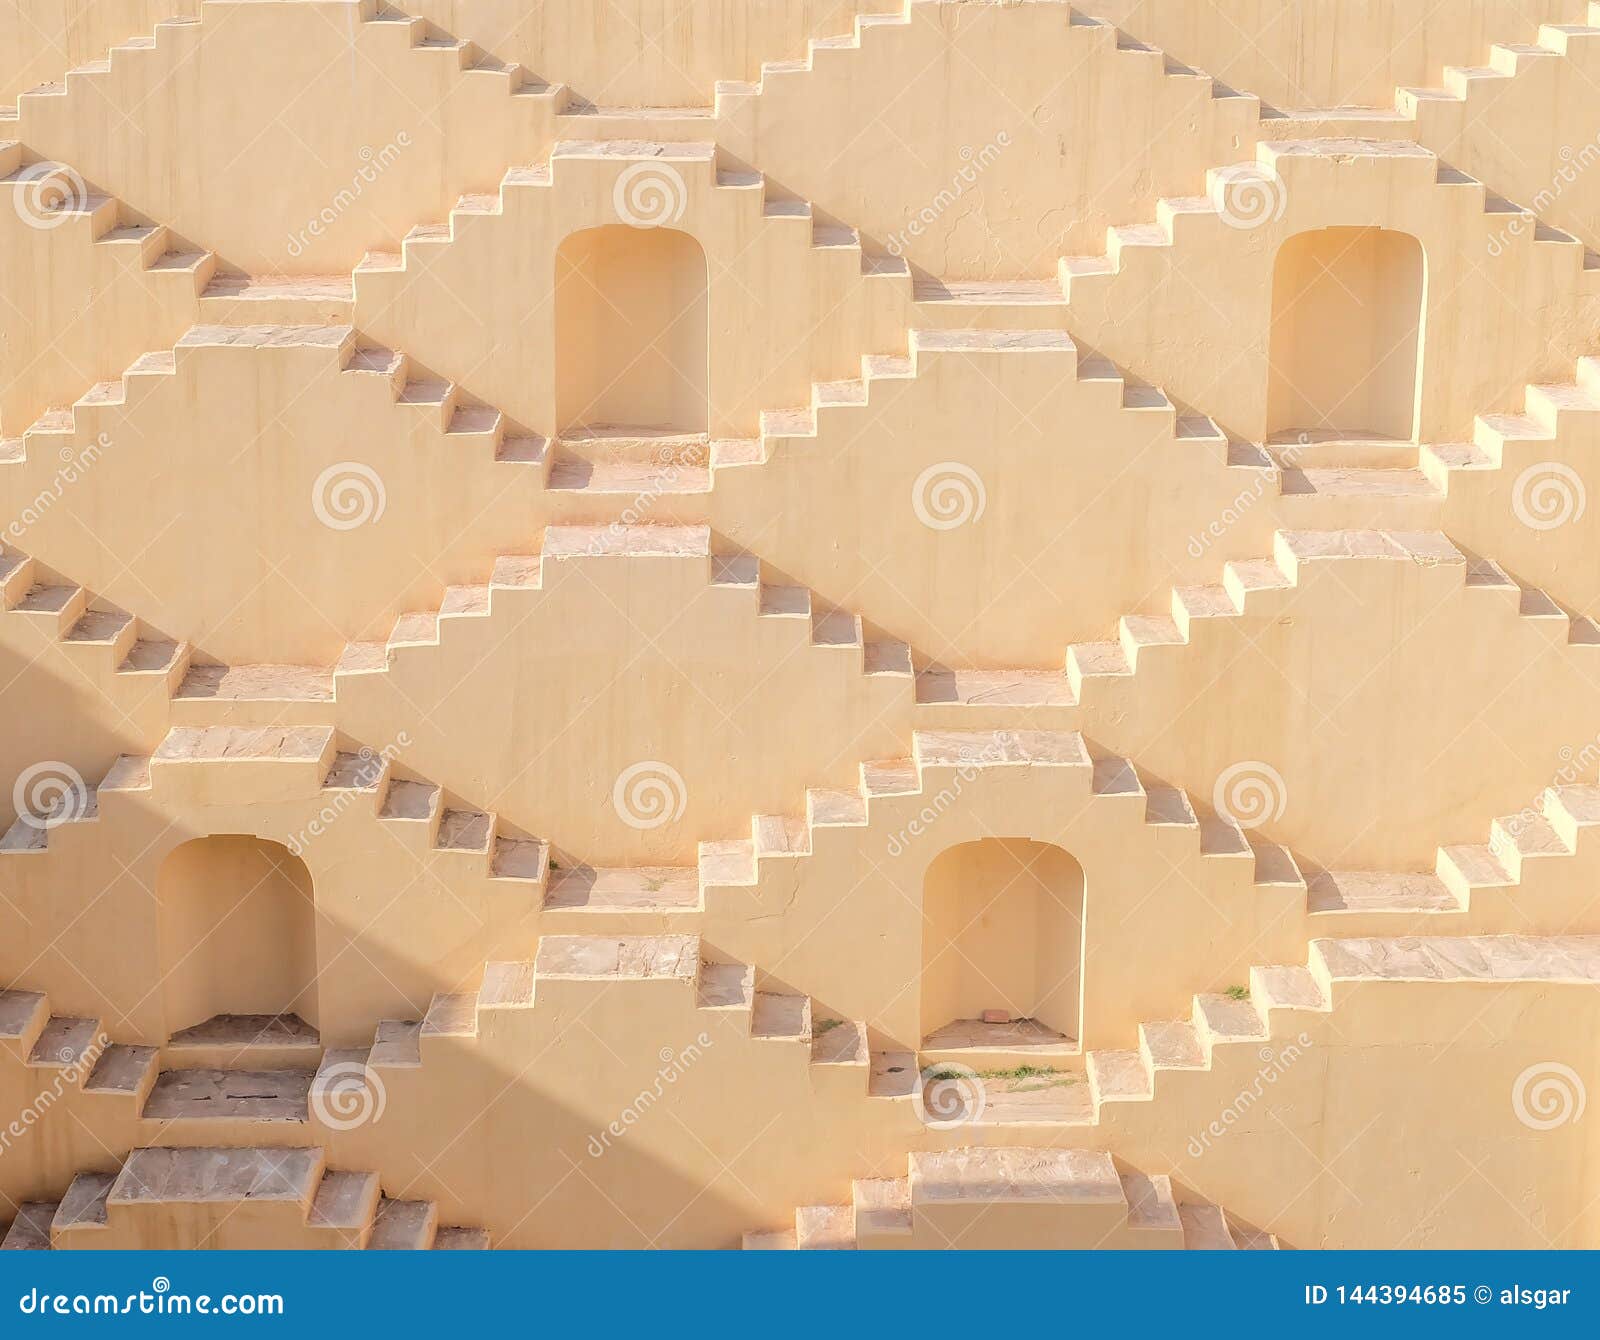 multistory stairs of a step-well in jaipur, india